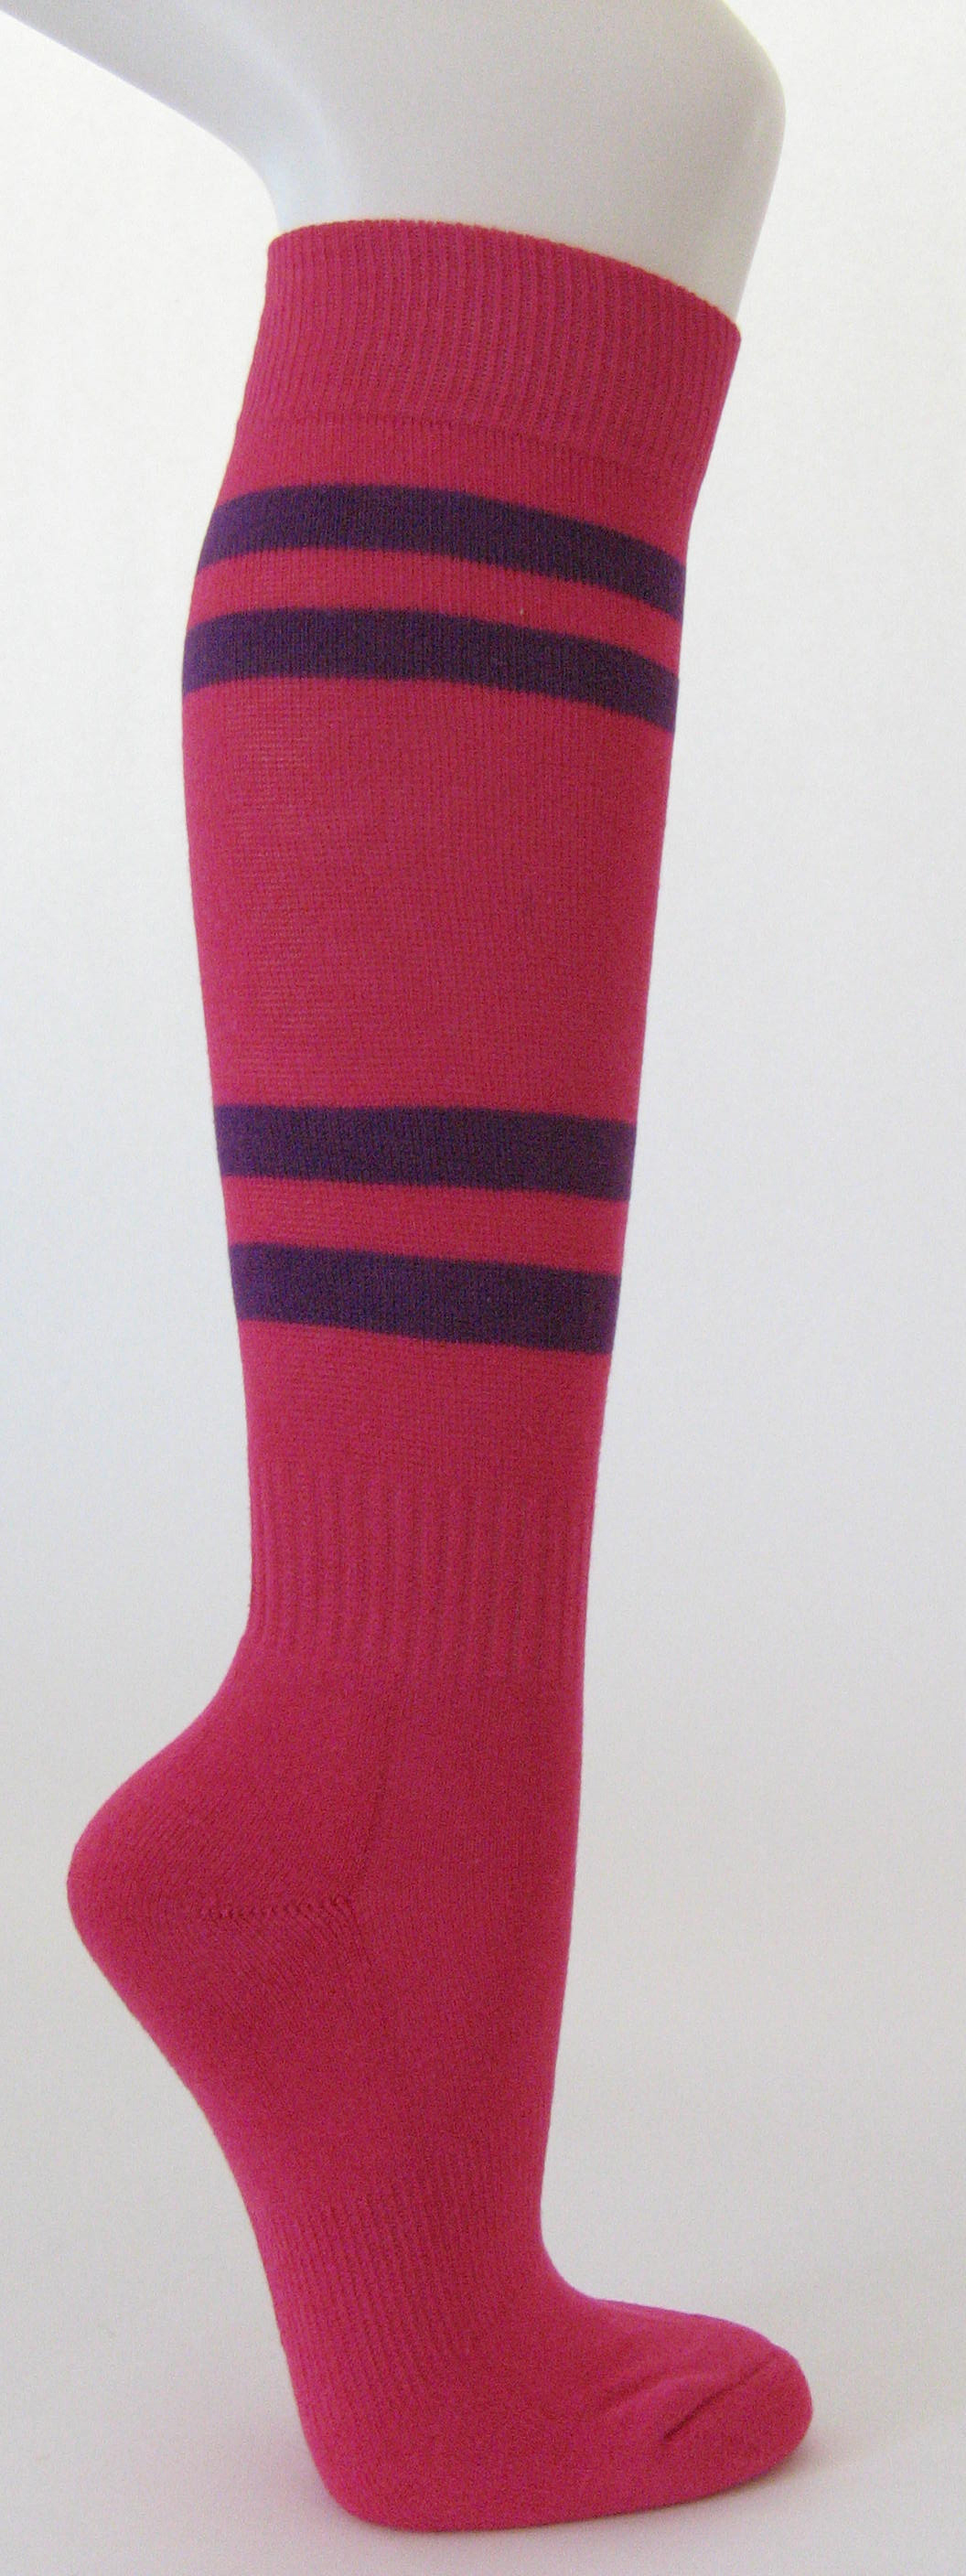 Hot pink cotton knee socks with purple stripes